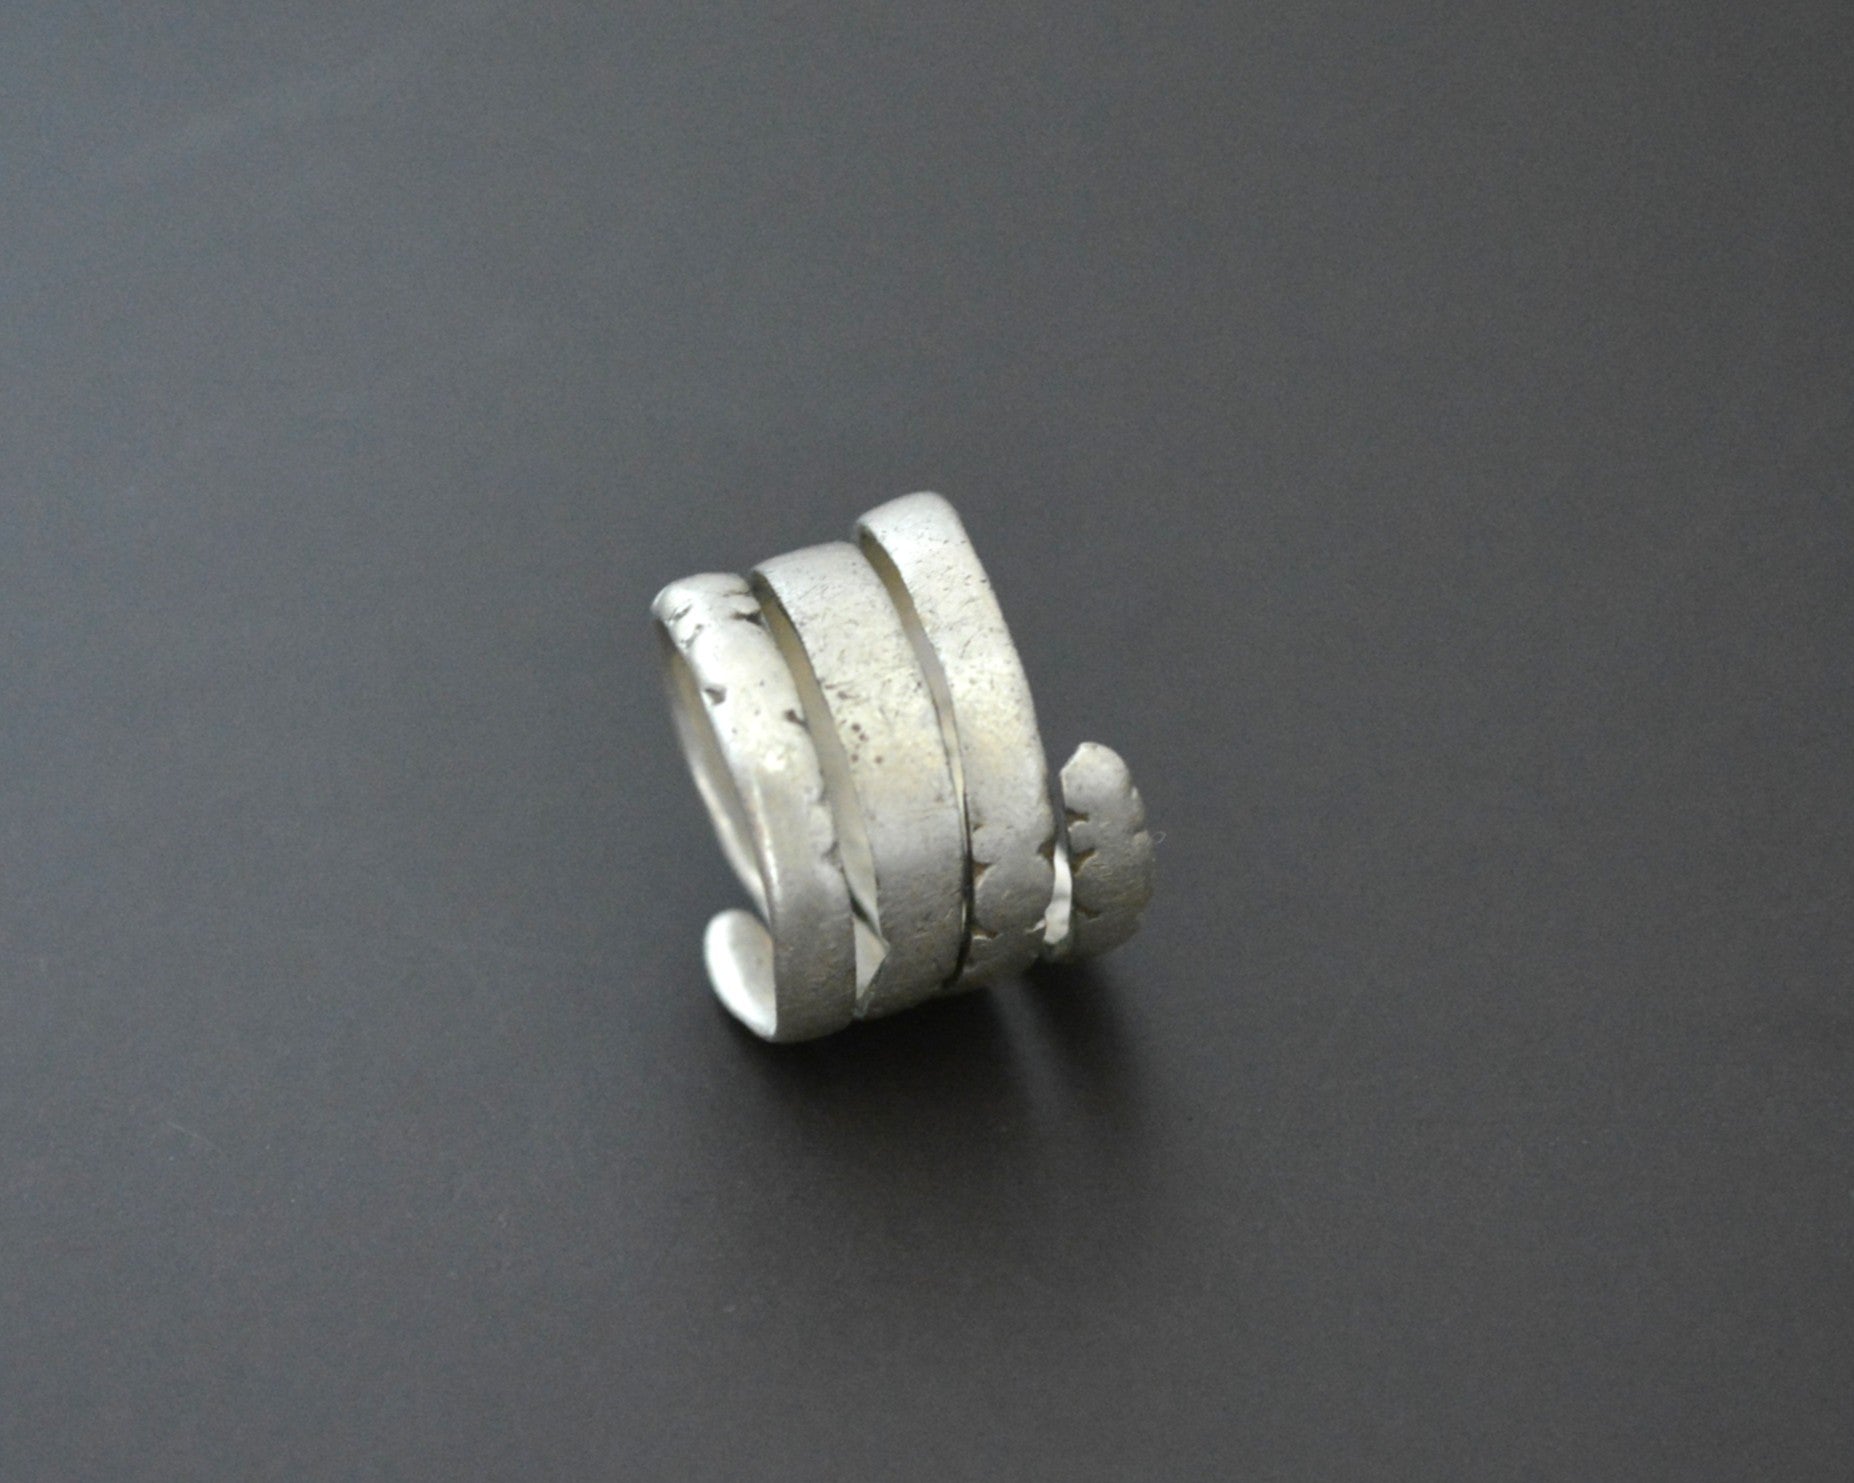 Pinky Coil Ring from India - Size 3